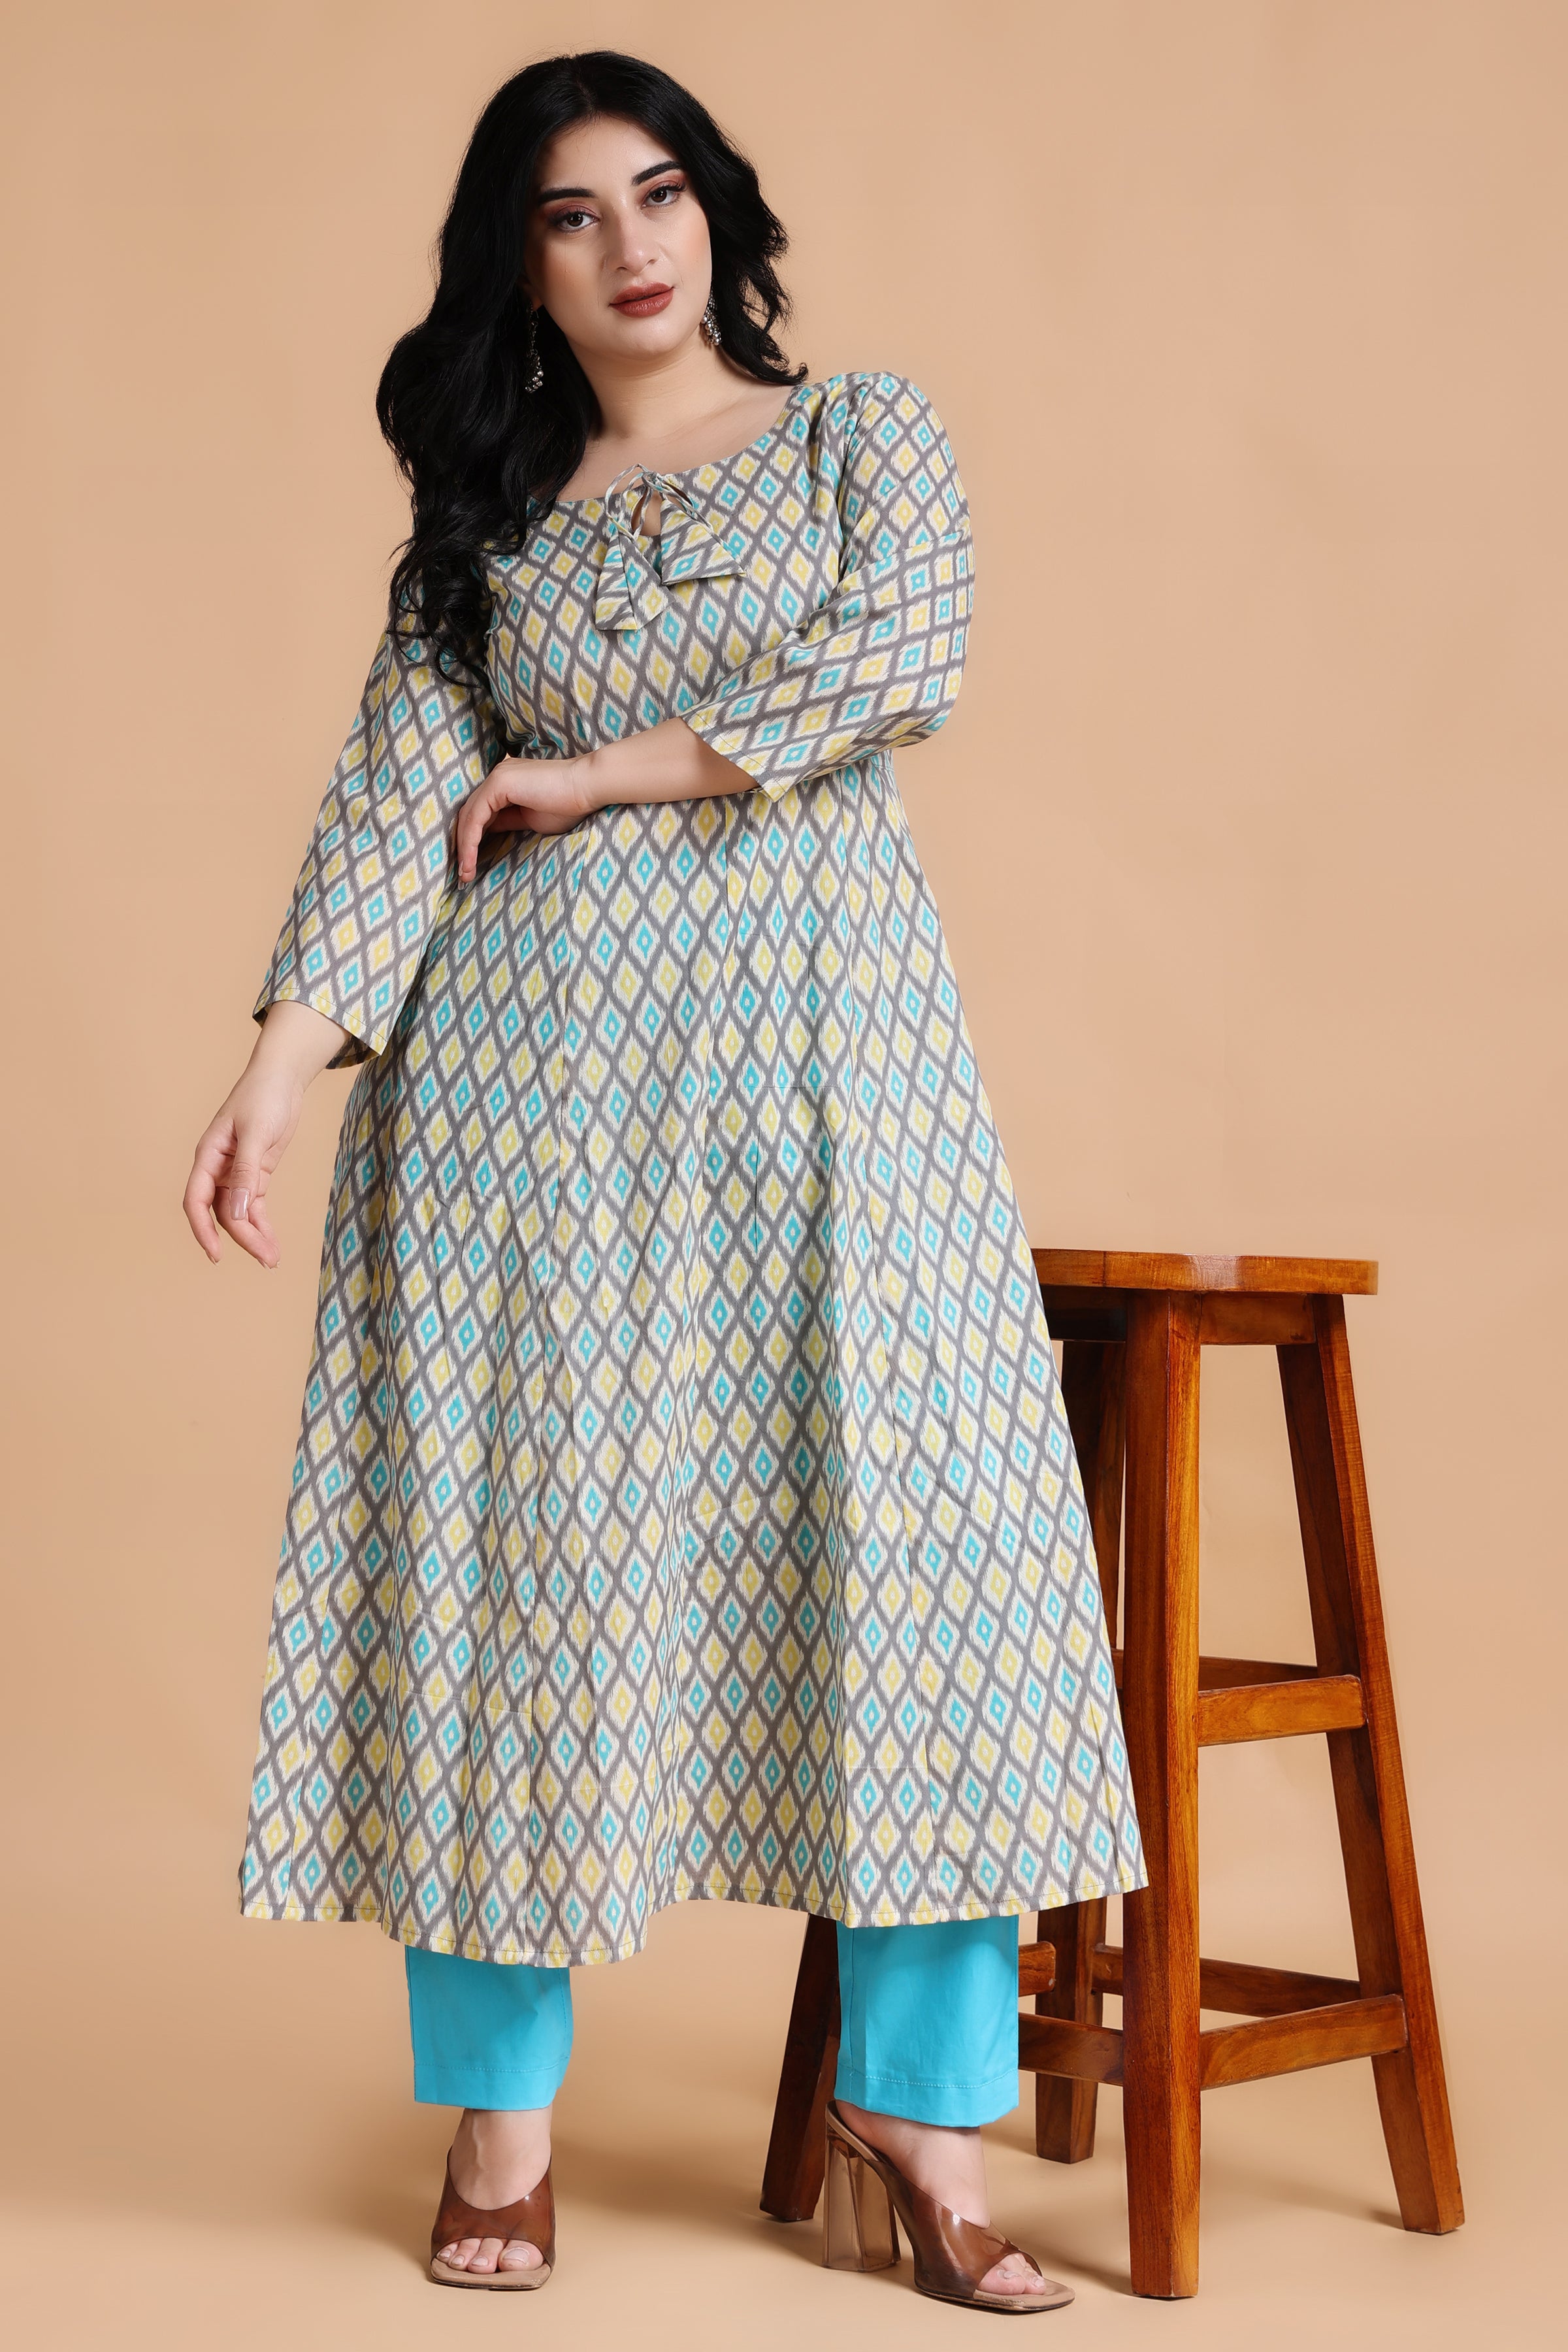 Buy Maternity Dresses for Women - Feeding Kurtis for Women Stylish Latest  Pregnancy Dresses for Women Online In India At Discounted Prices